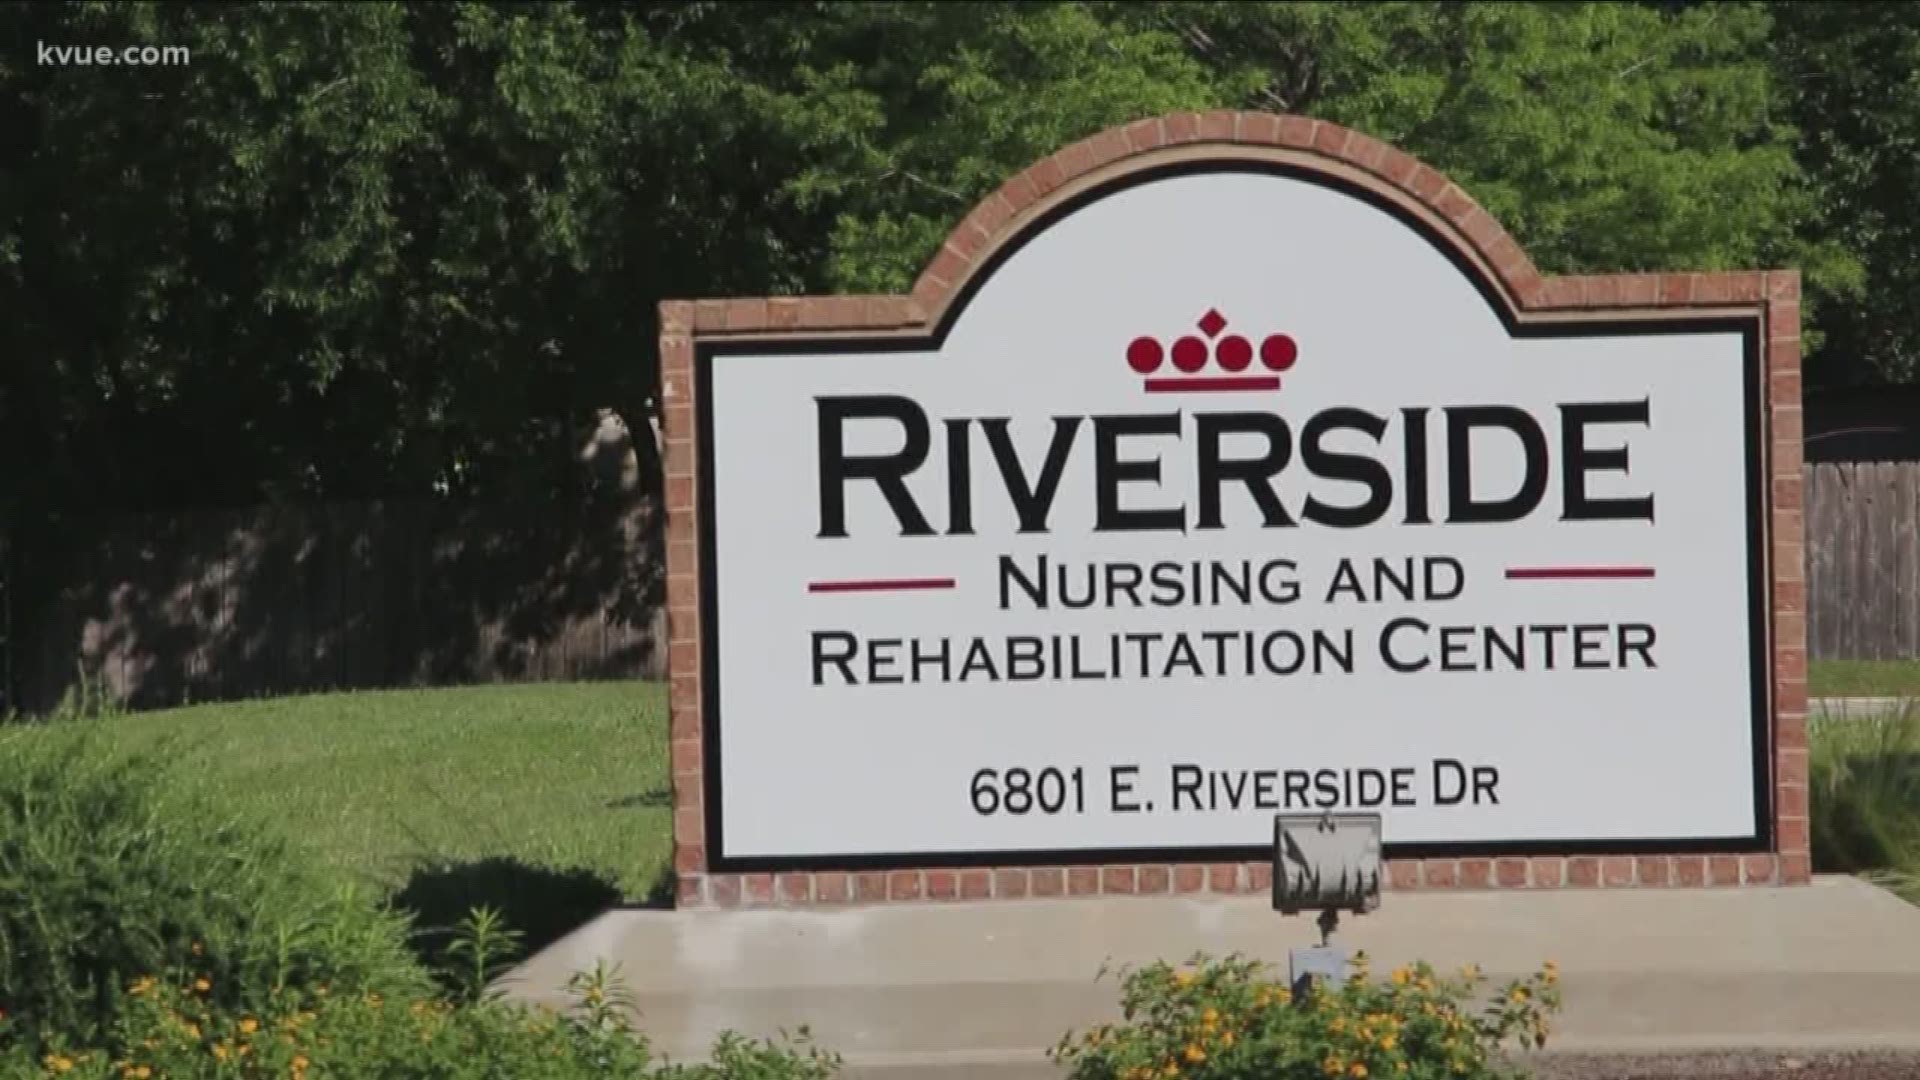 In audio obtained by the KVUE Defenders, a state official admits some facilities have had staff working, even while they have COVID-19 symptoms.